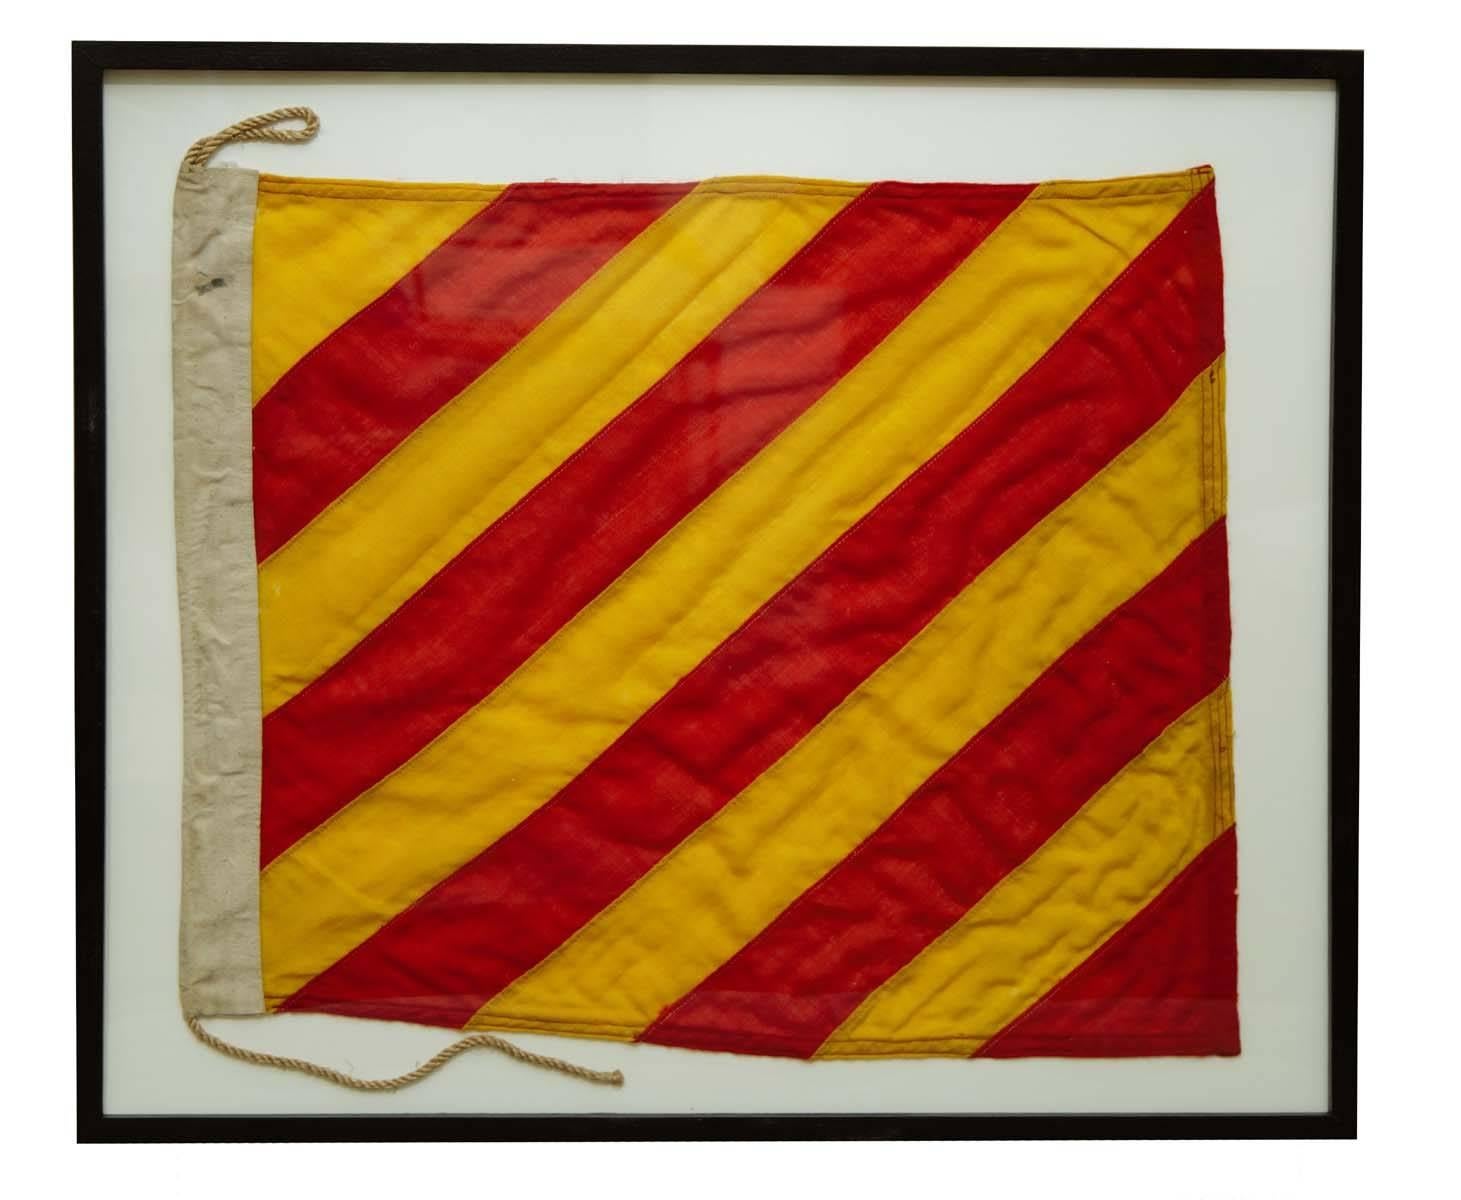 This is a set of original Nautical signal flags from a naval vessel in World War two. The six are mounted and framed in black wood frames with new plexi fronts.  This large set is wonderful wall decor with bright colors and authentic aged texture